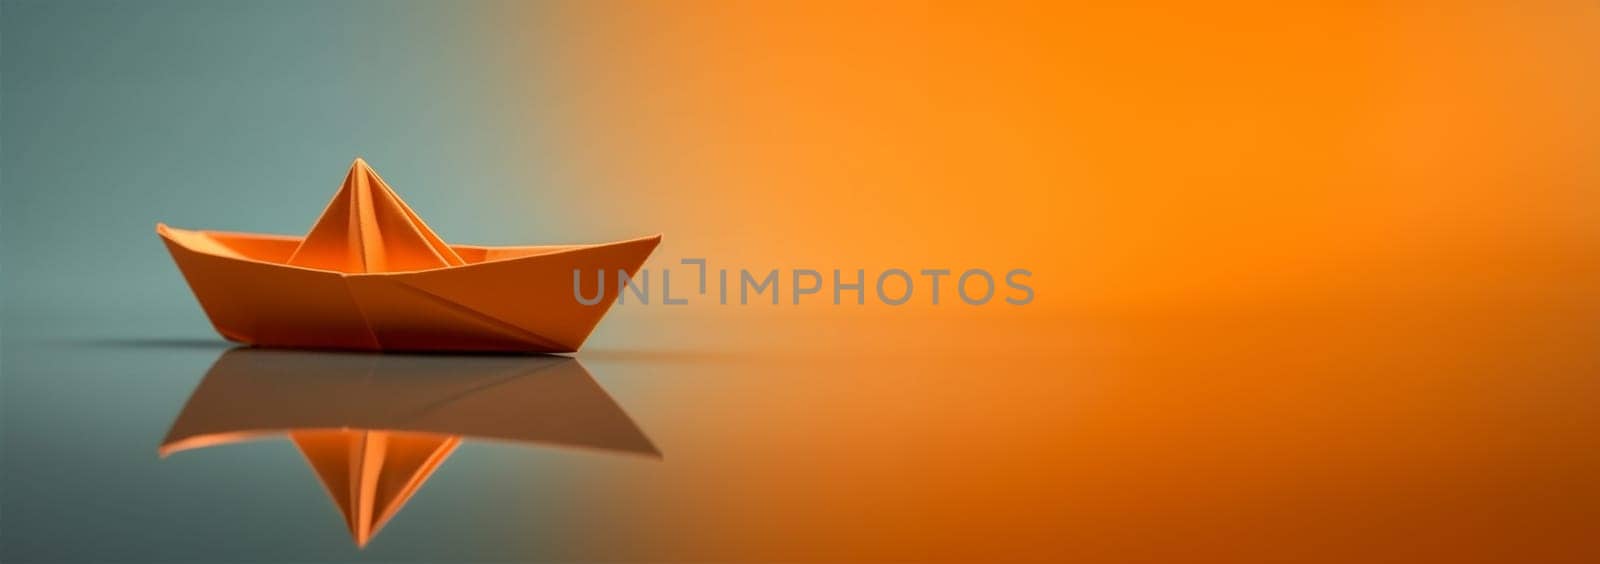 Creative image of white origami ships placed behind blue and orange paper ship representing concept of leadership on light background Copy space. Business concept design. by Annebel146